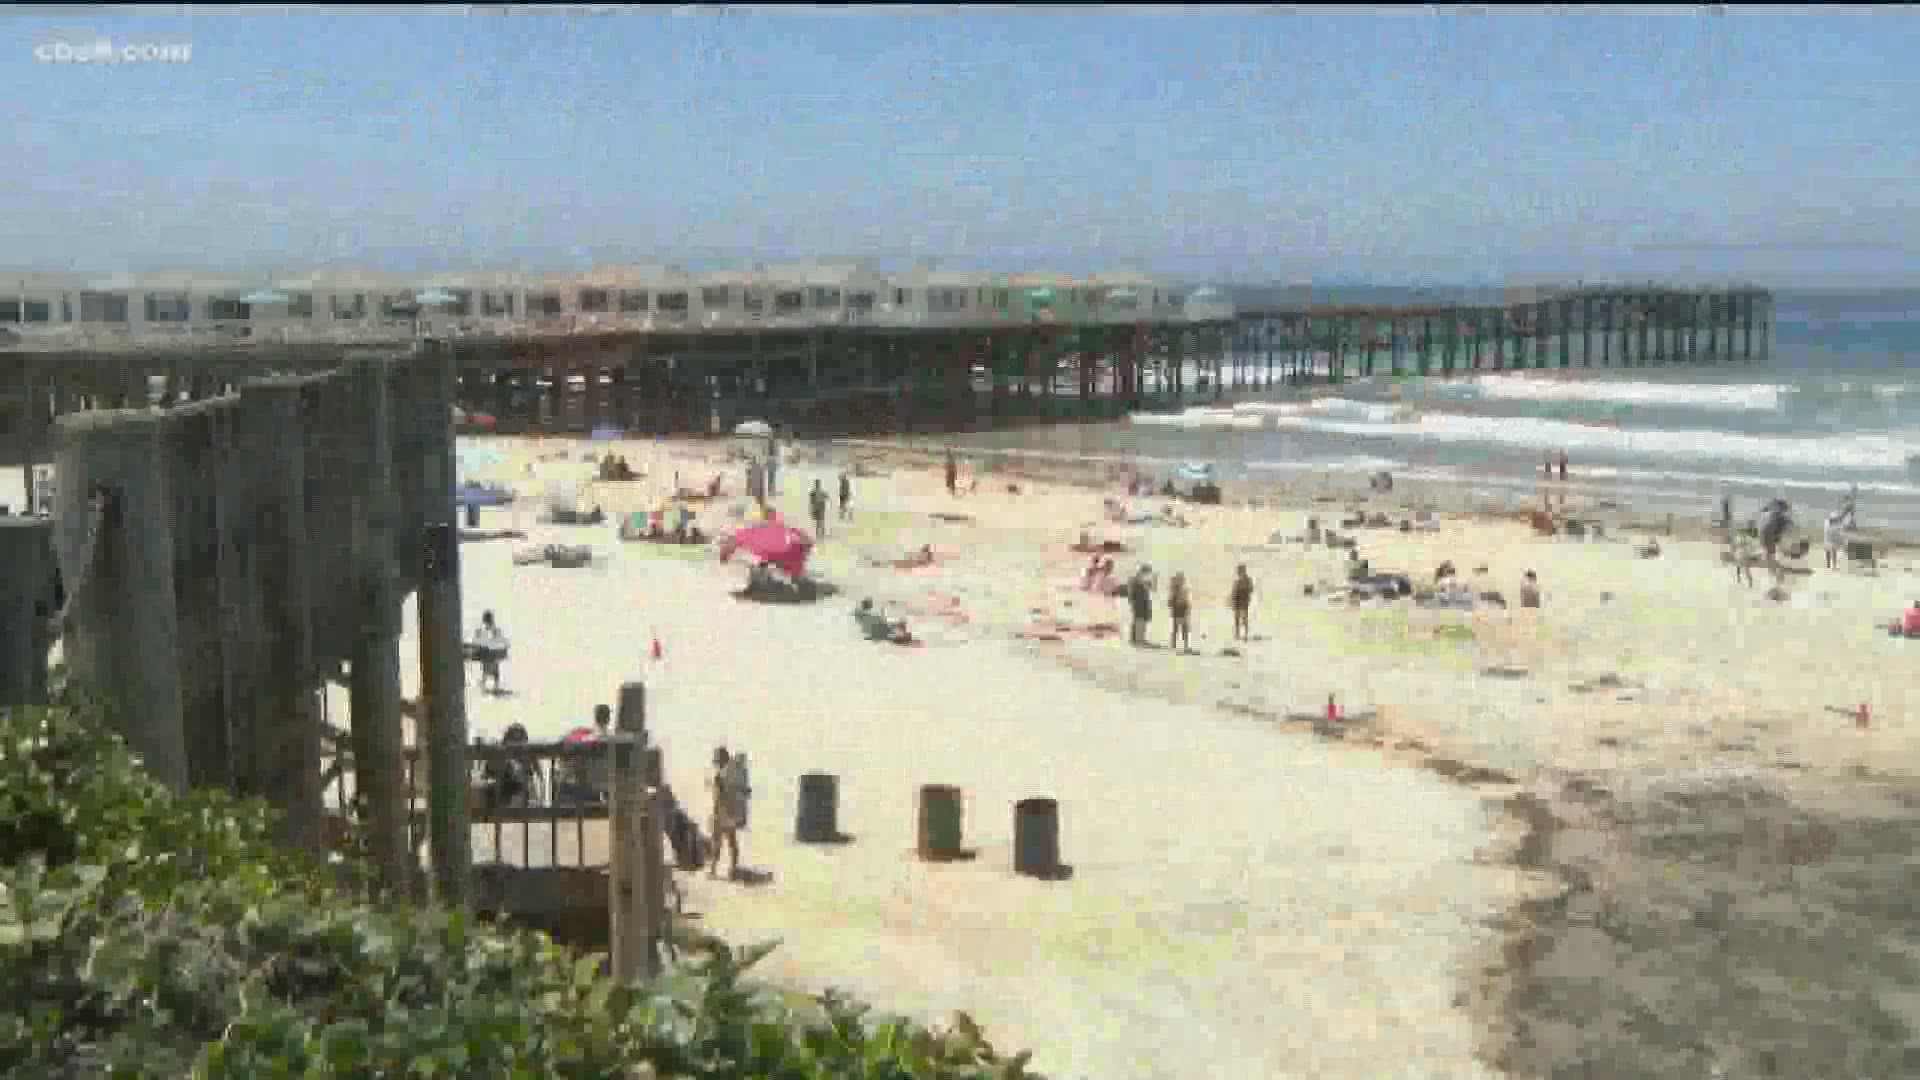 It was also announced late Friday that the cities of Carlsbad and Oceanside would be closing their beach parking lots to try and keep the crowd sizes down.